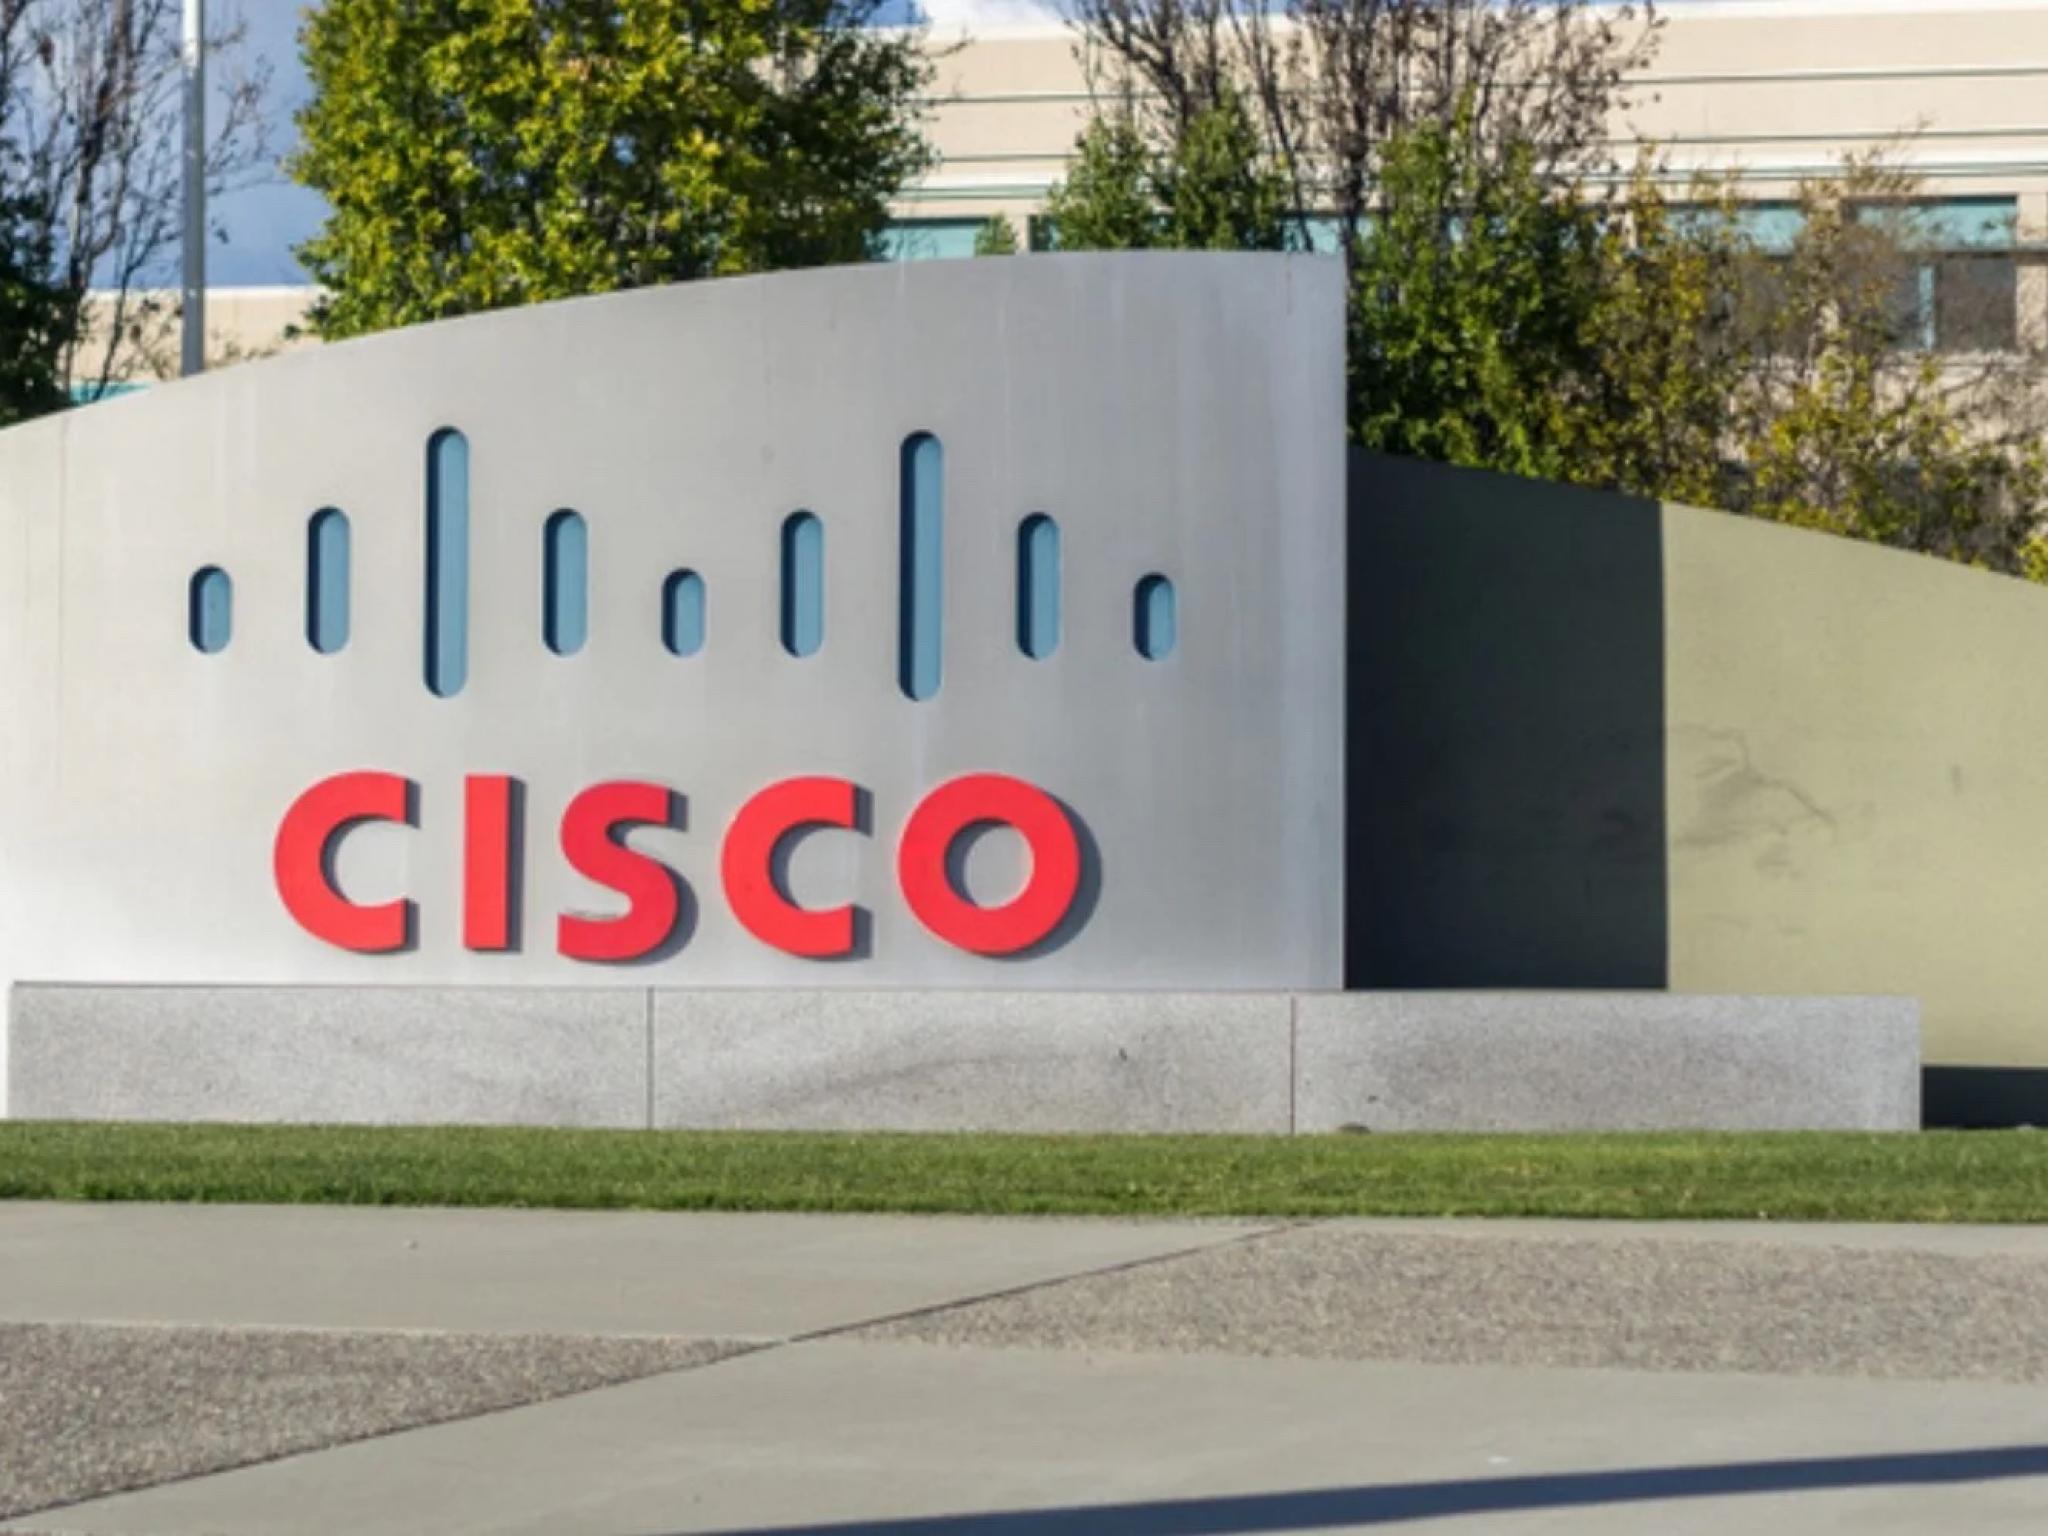  3-catalysts-to-drive-growth-at-cisco-28b-splunk-deal-offers-great-synergies-analyst-says 